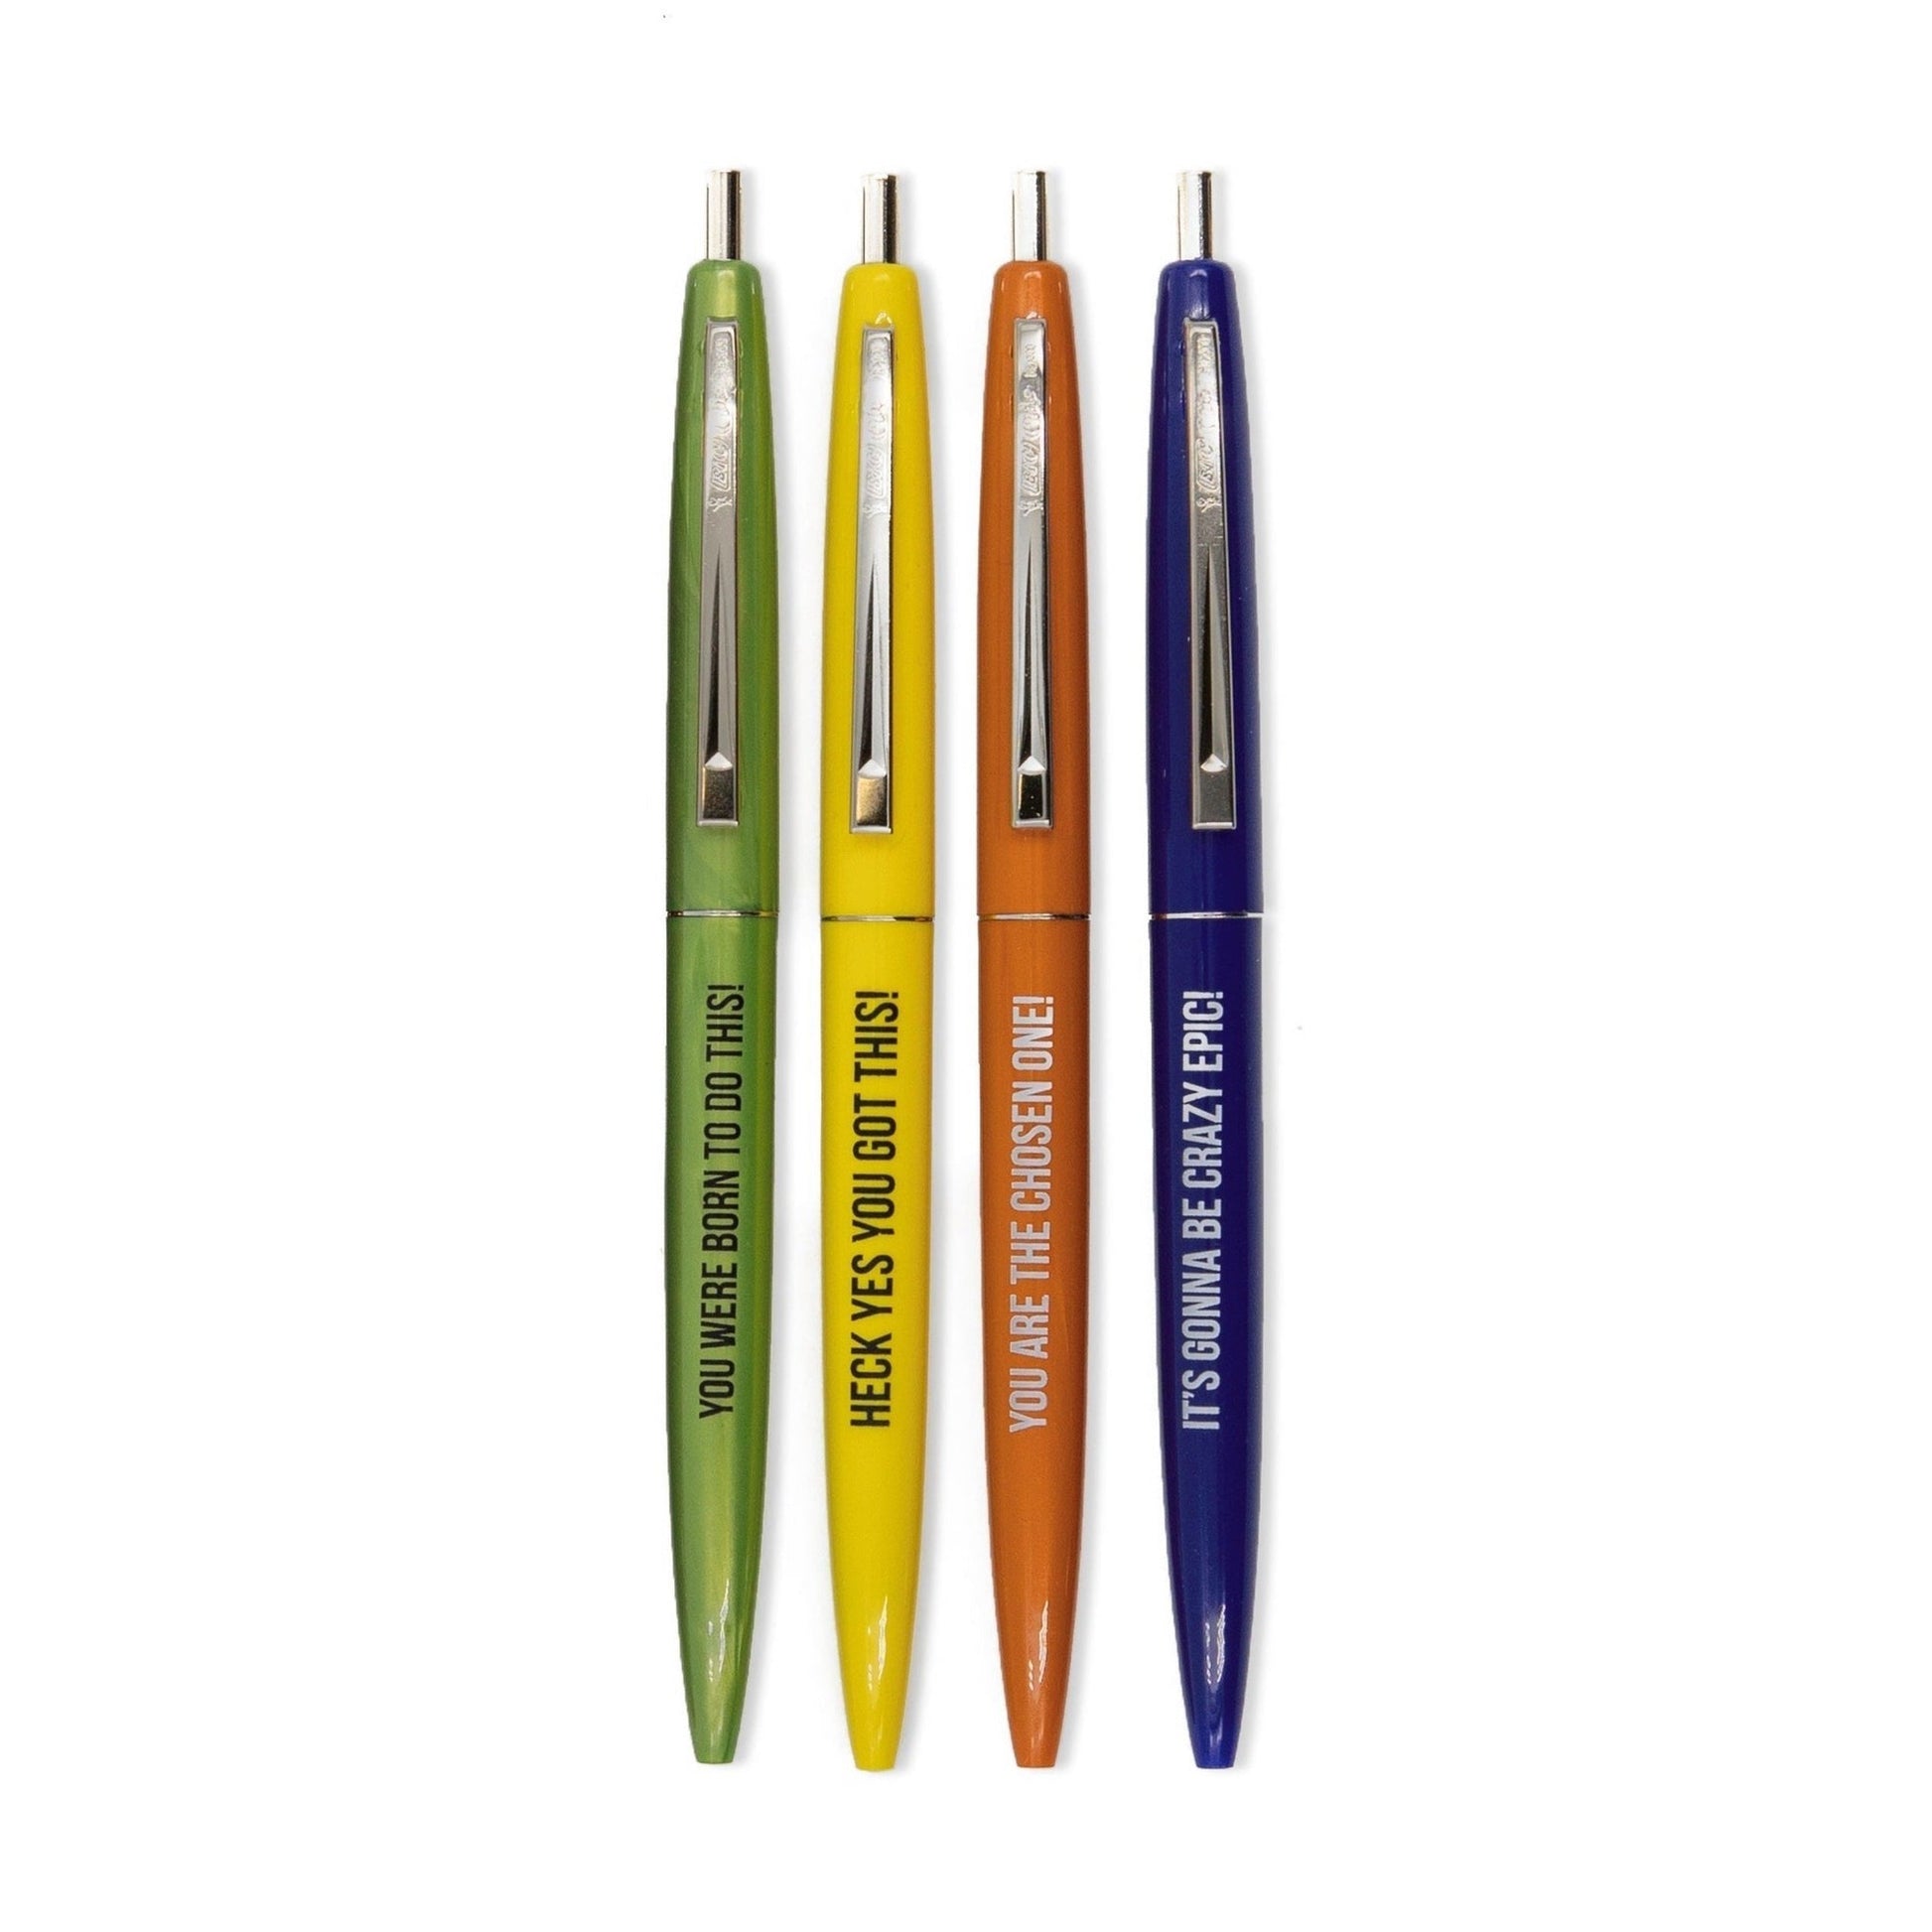 Ridiculously Motivational Pen Set of 4 in Multicolor